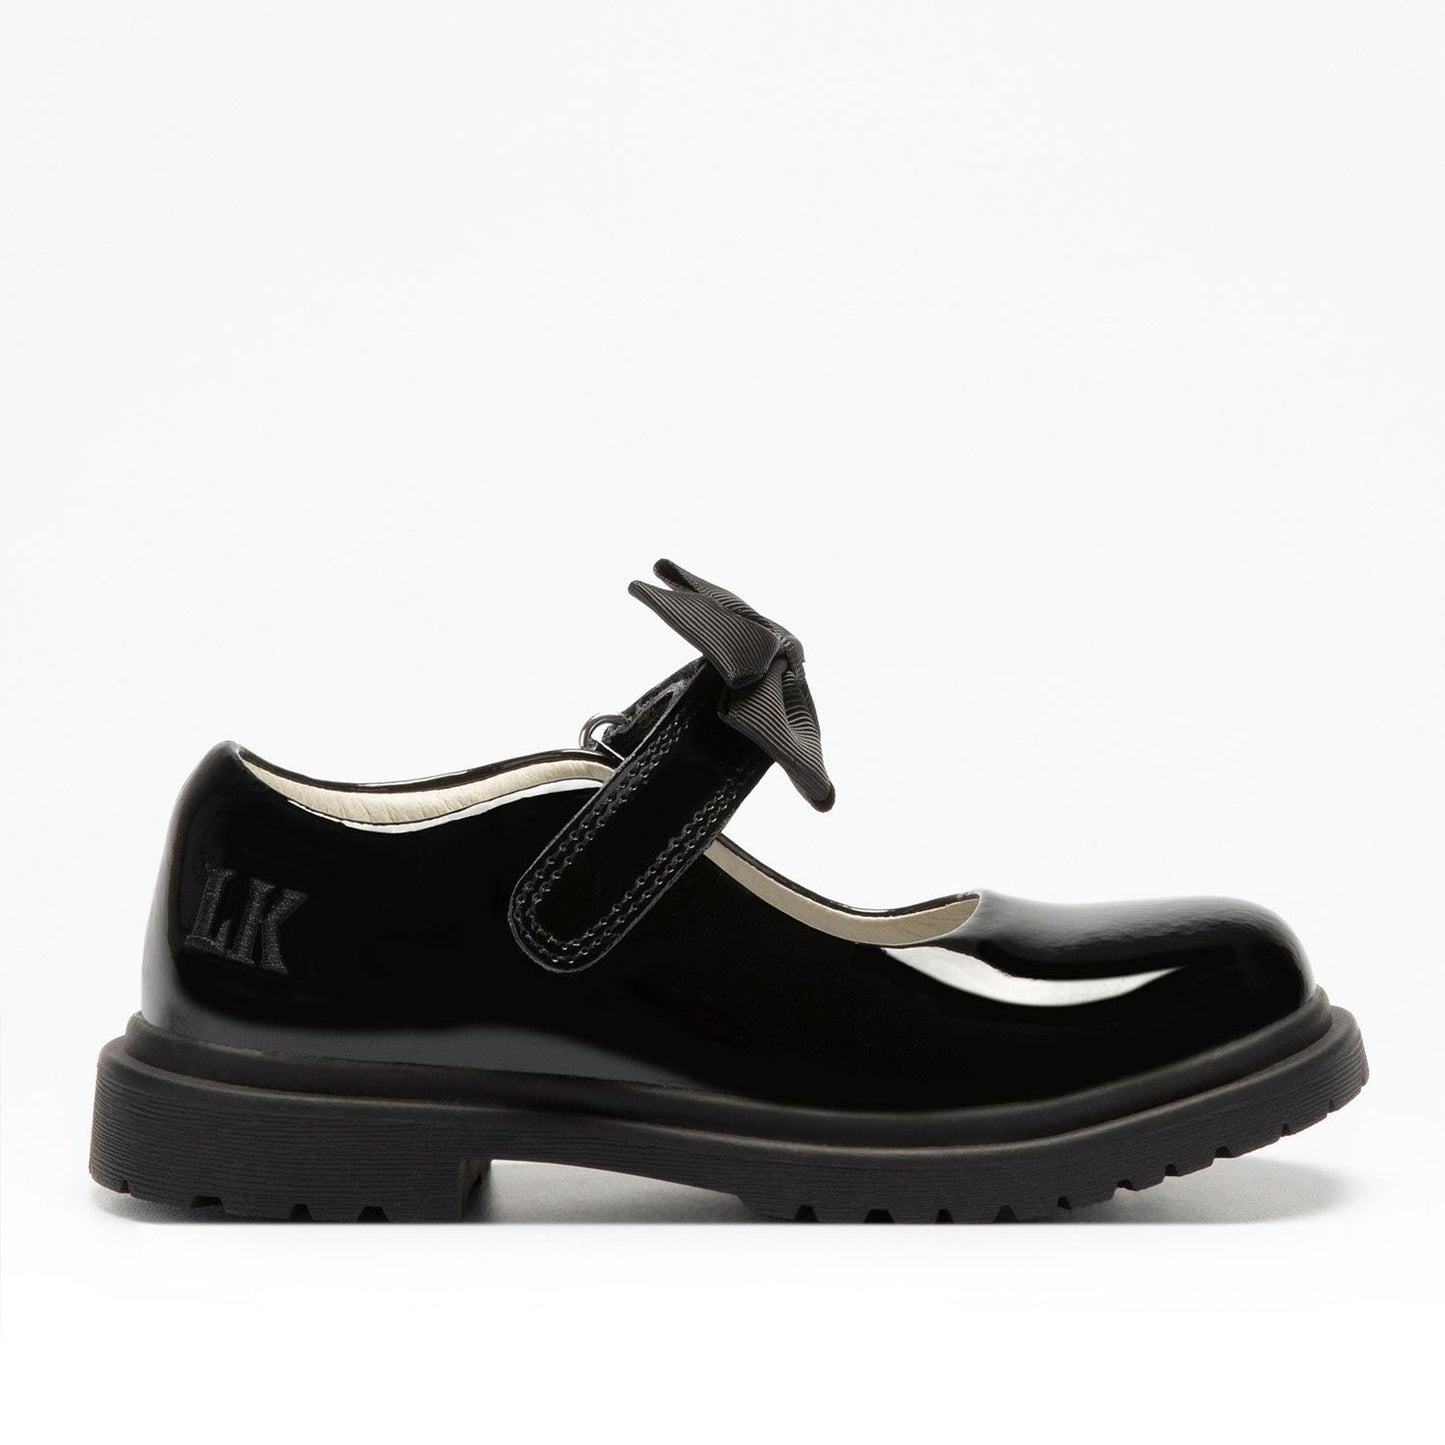 A girls chunky Mary Jane school shoe by Lelli Kelly, style LK8661 Maisie, in black patent leather with velcro fastening and detachable black fabric bow. Right side view.